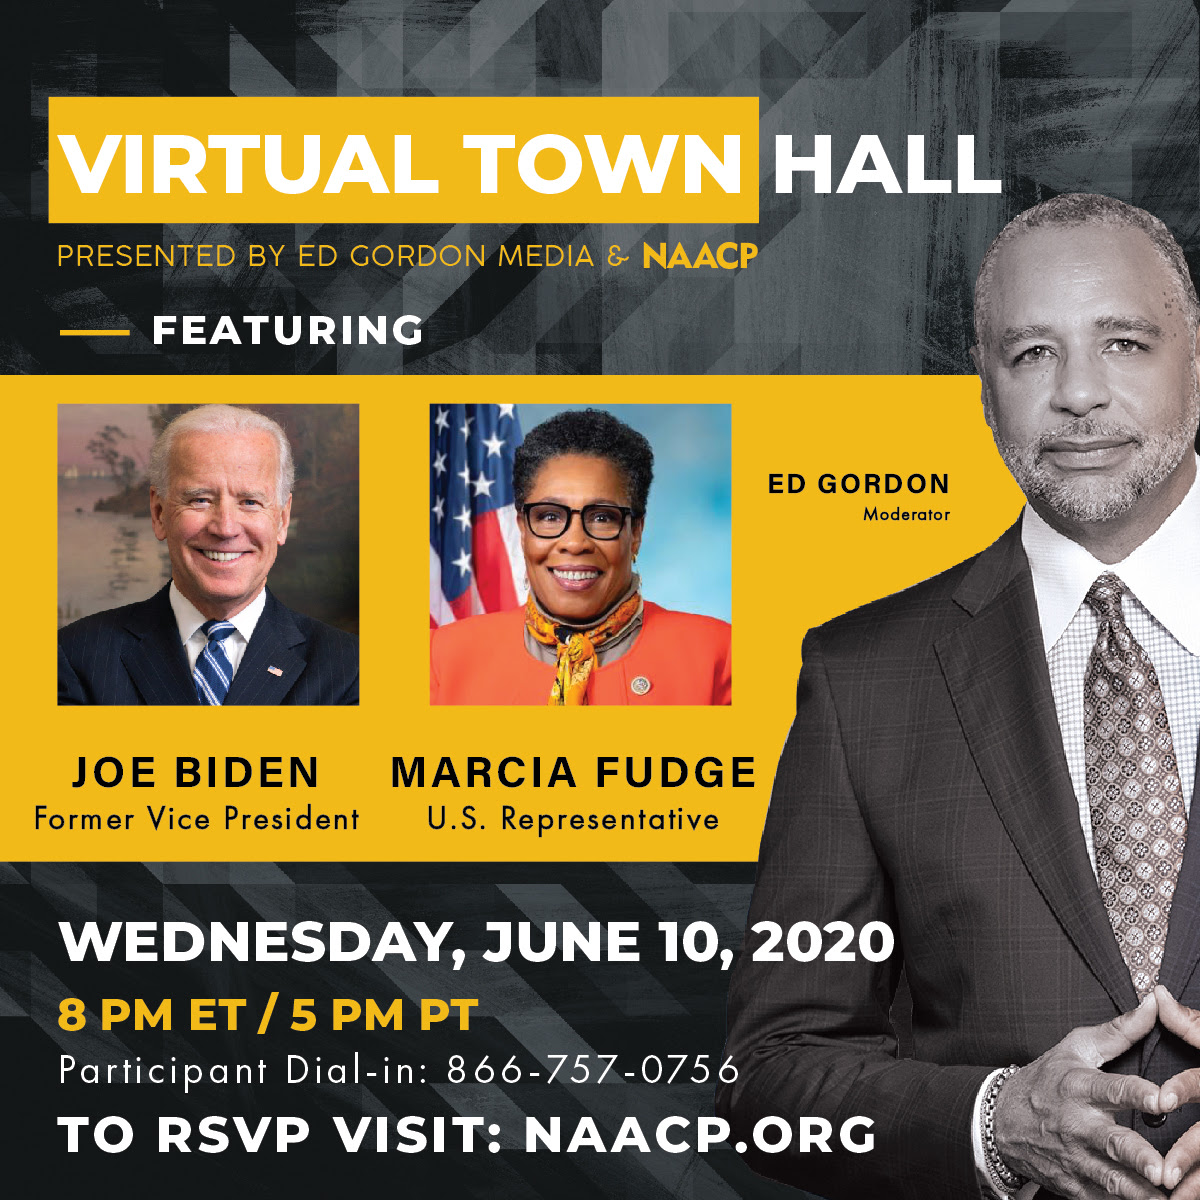 RSVP for the Upcoming Virtual Town Hall Featuring Vice President Joe Biden and U.S.Representative Marcia Fudge on NAACP.org